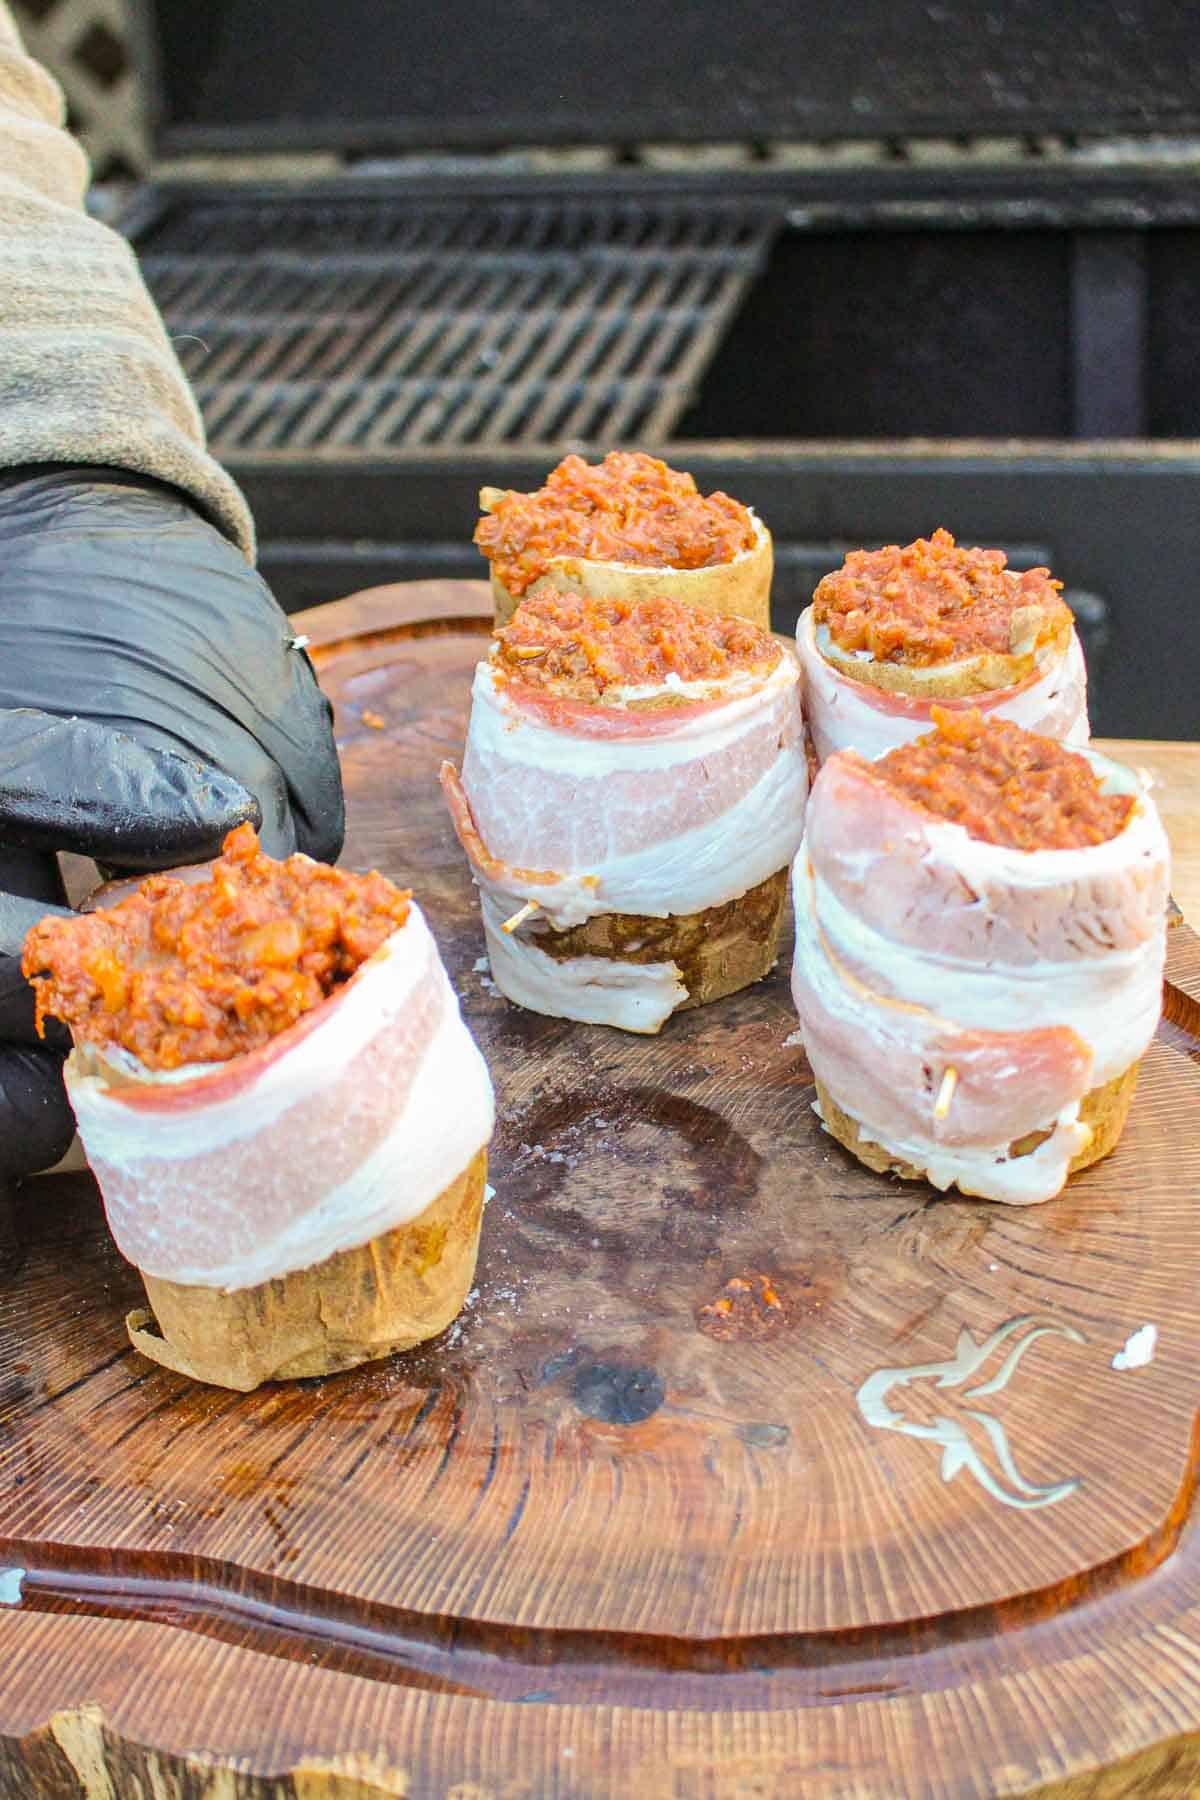 Wrapping the Chili Cheese Potato Volcanoes with bacon.